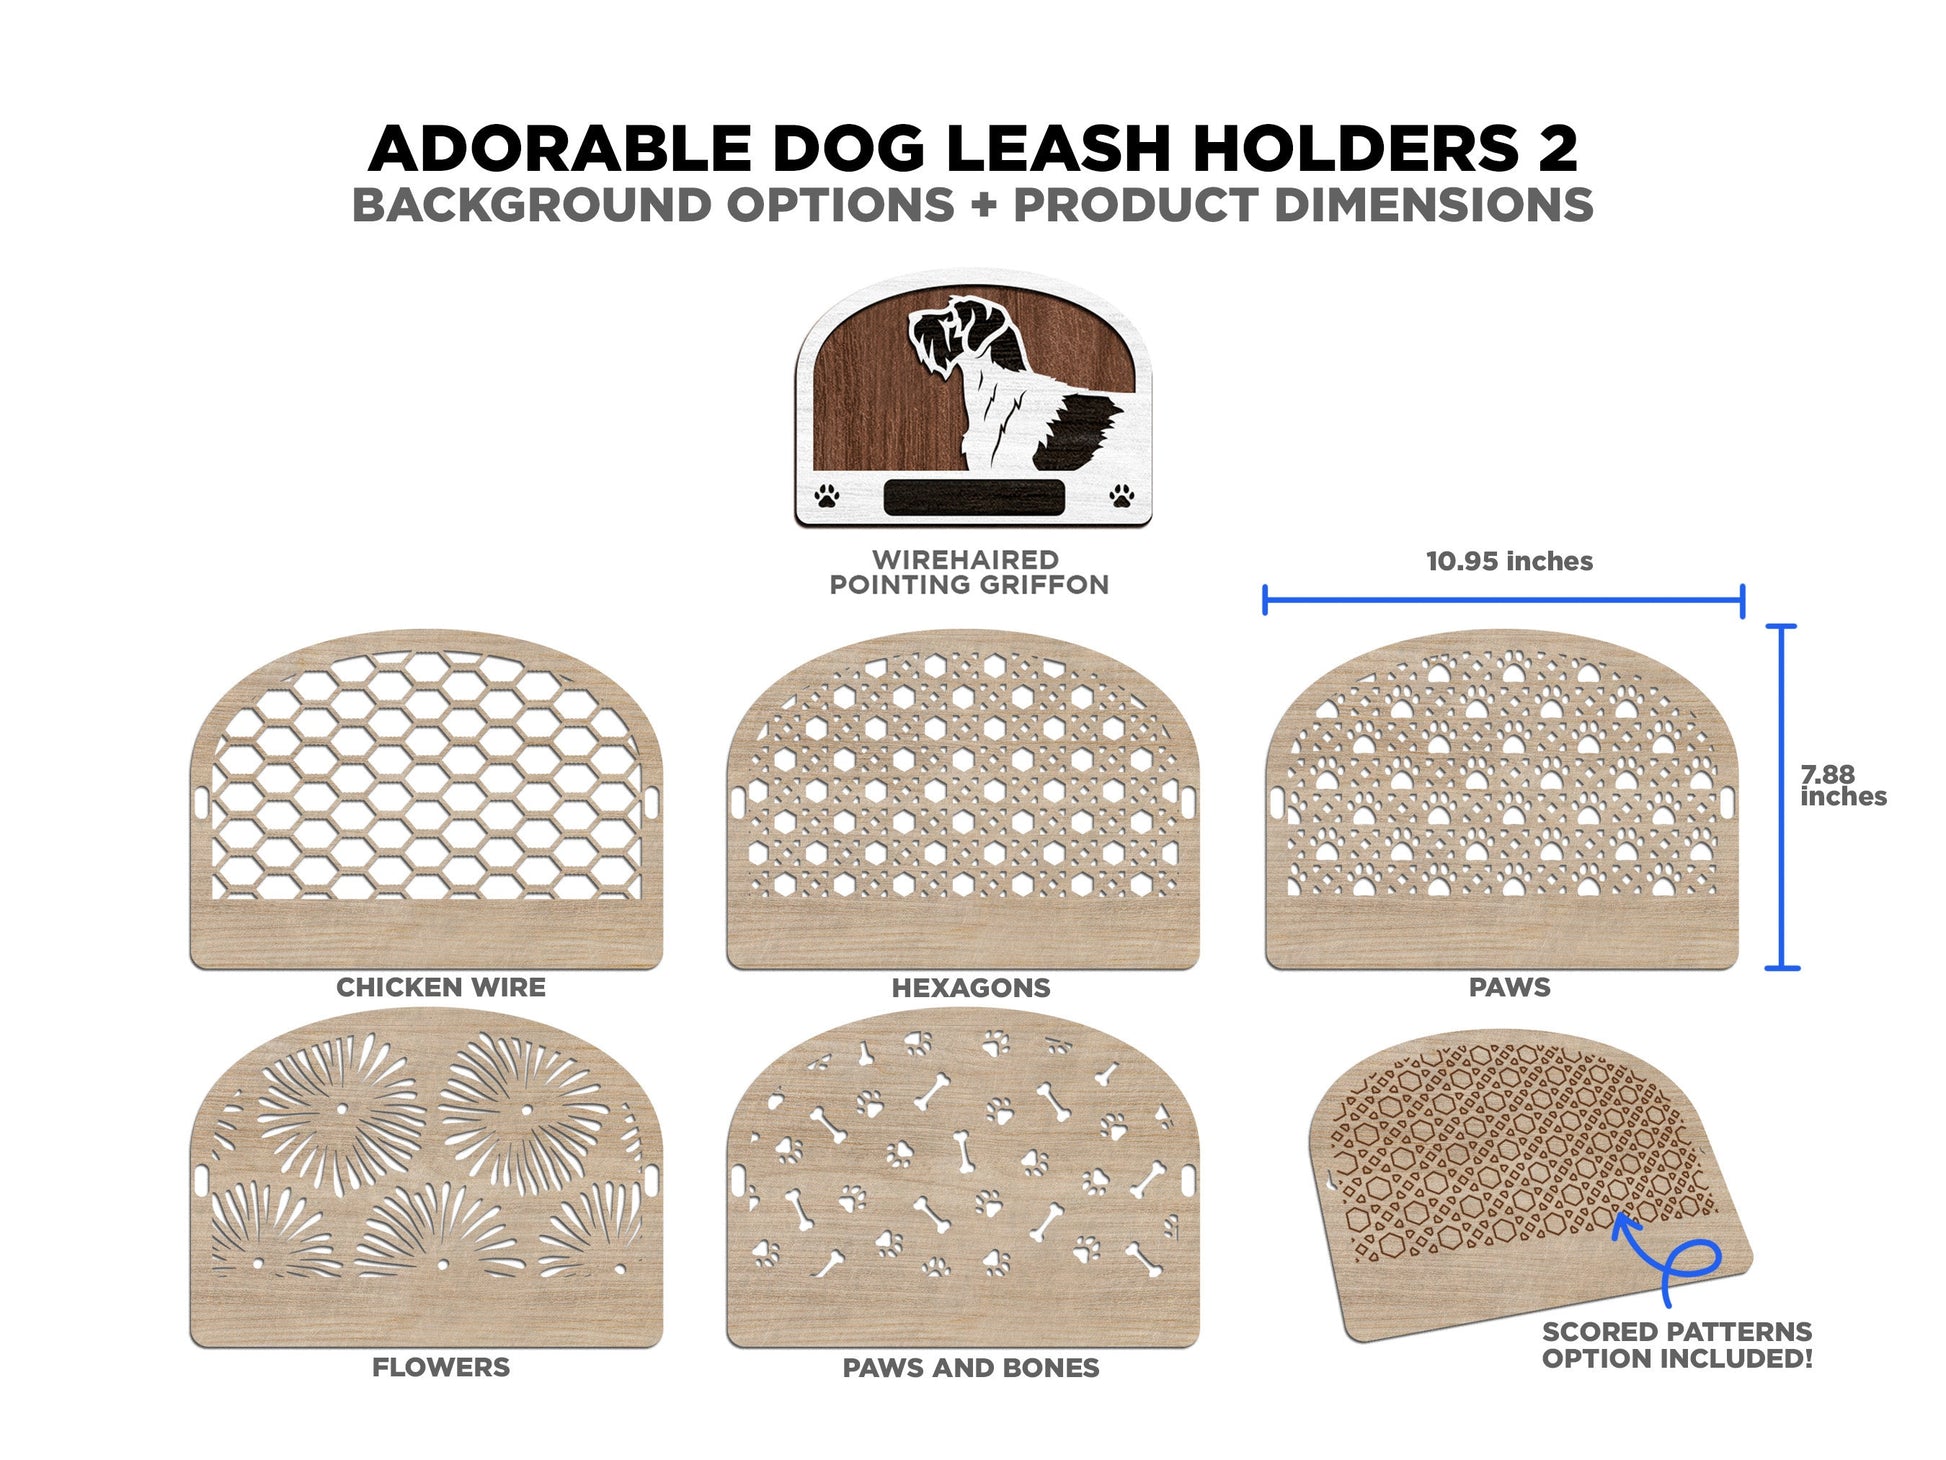 Adorable Dog Leash Holders - Pack 2 - 50 Breeds included - SVG, PDF,AI file types - Glowforge and Lightburn Tested